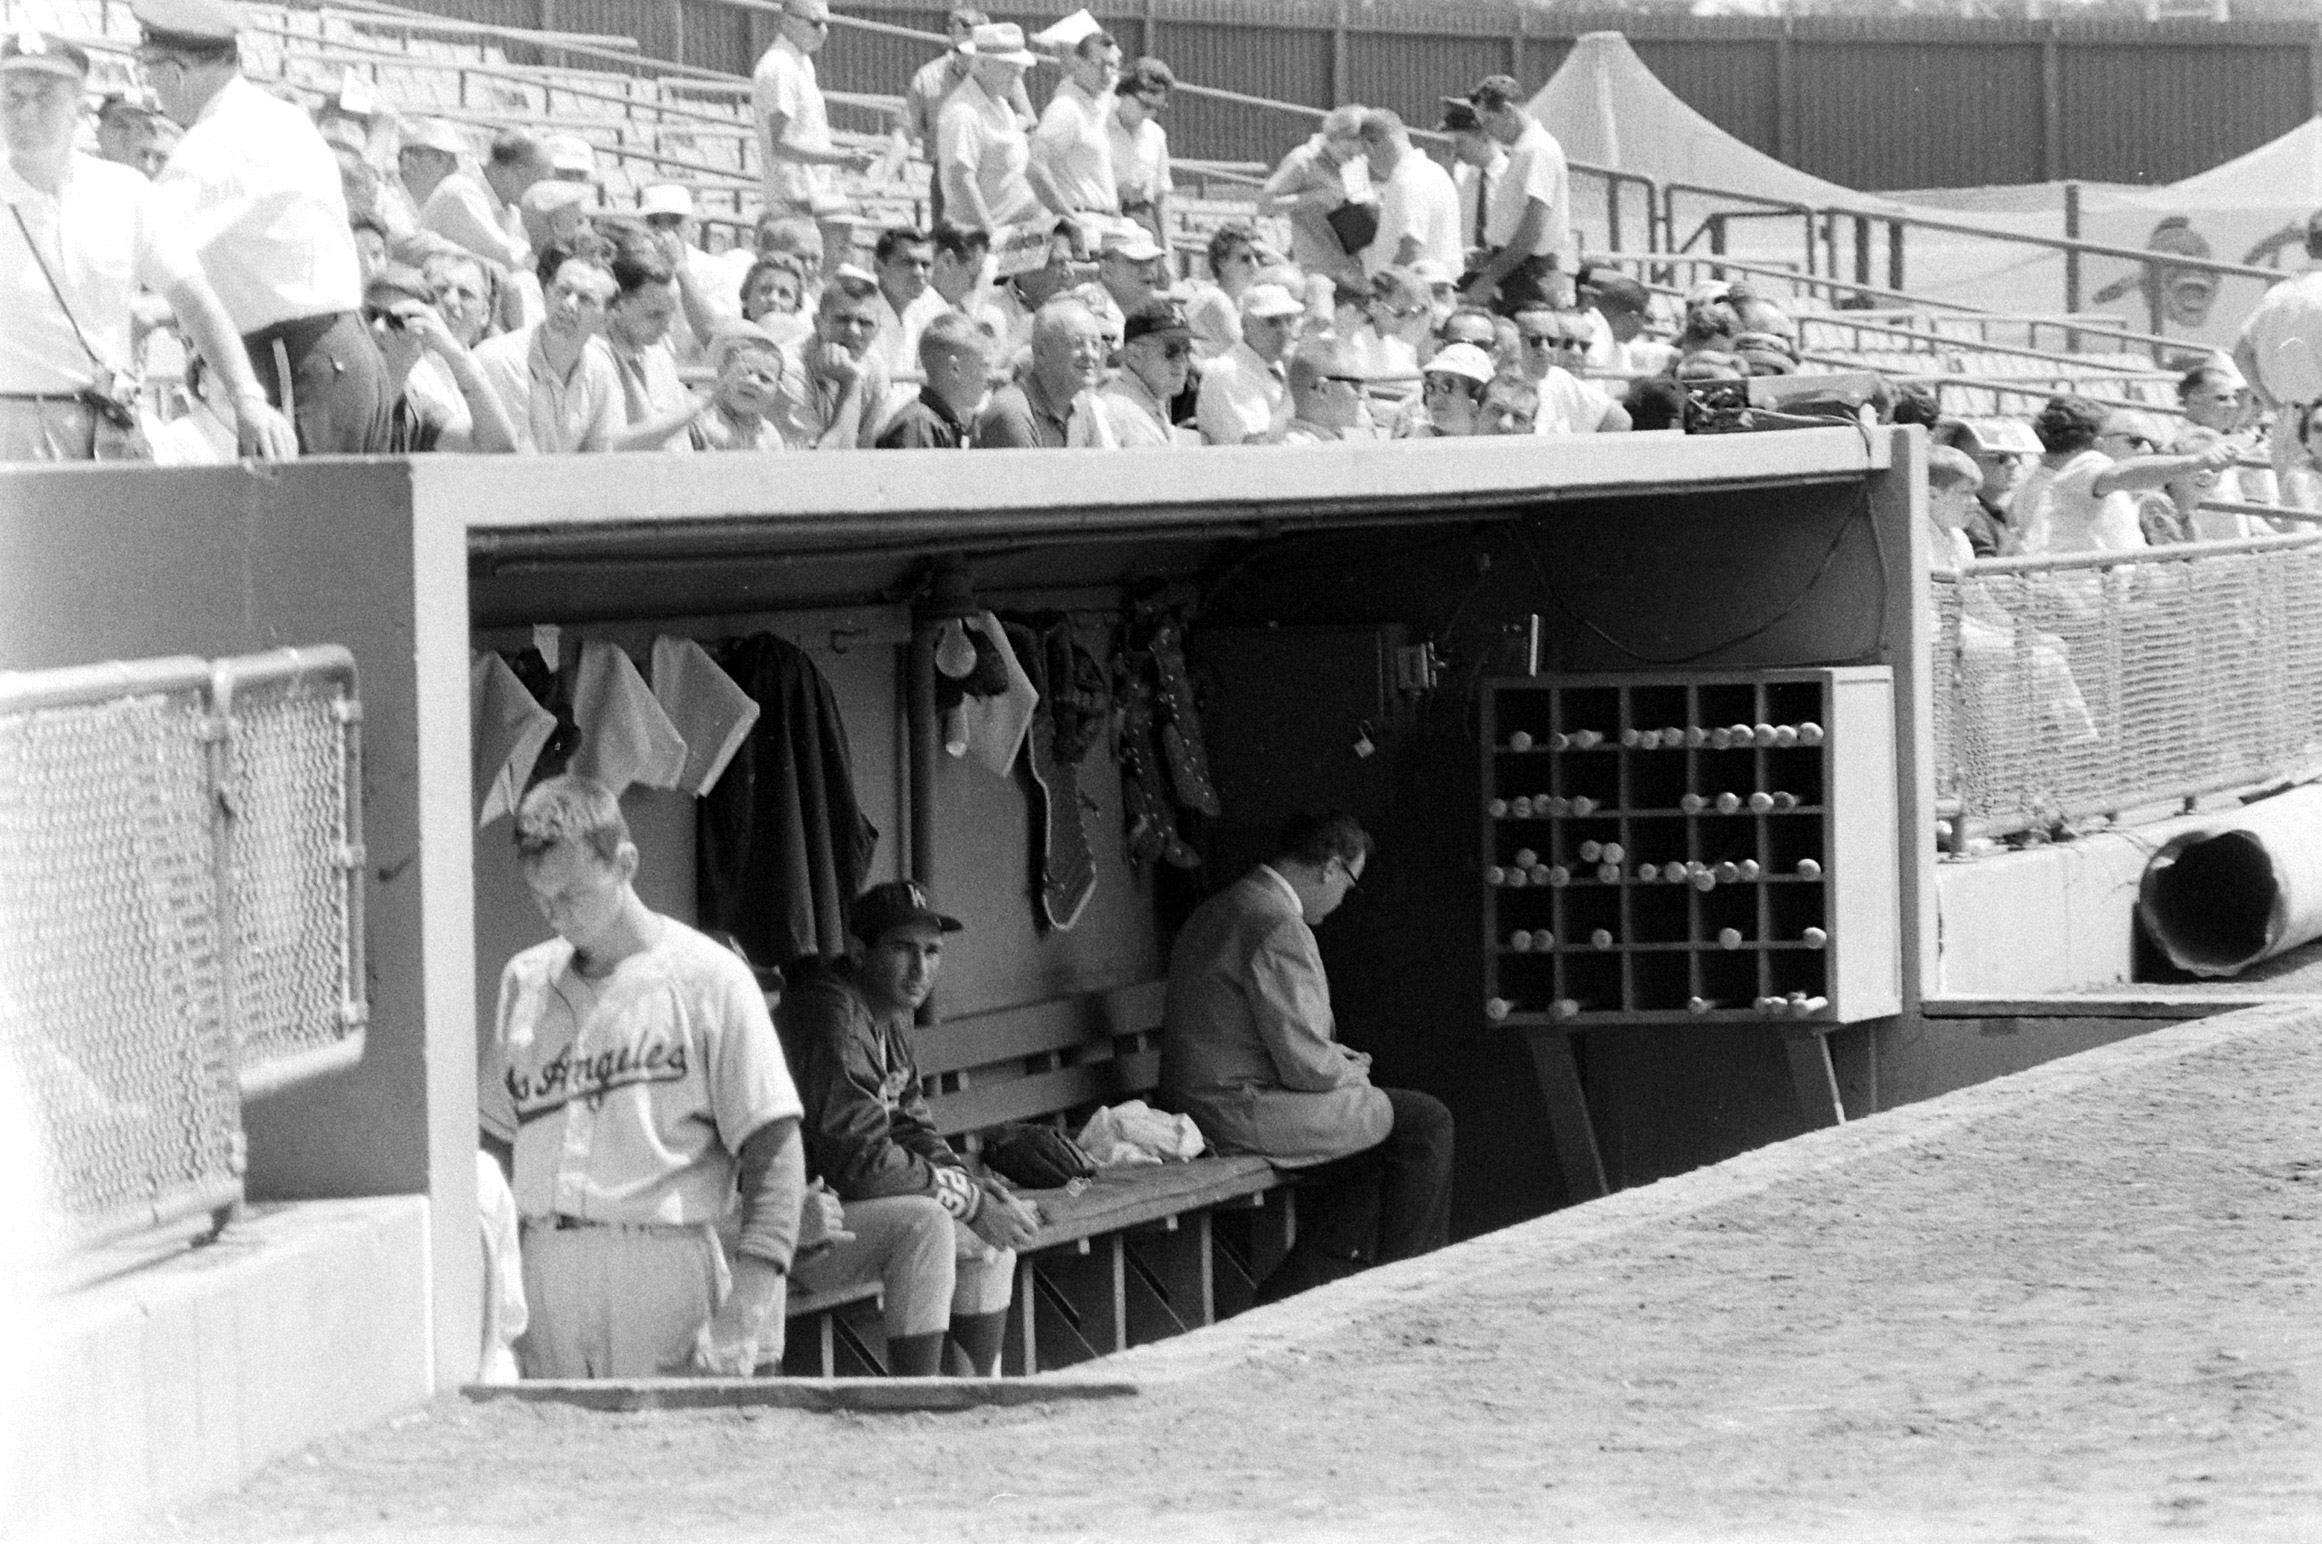 Los Angeles Dodgers pitcher Sandy Koufax in the dugout during a game against the Milwaukee Braves, 1963.